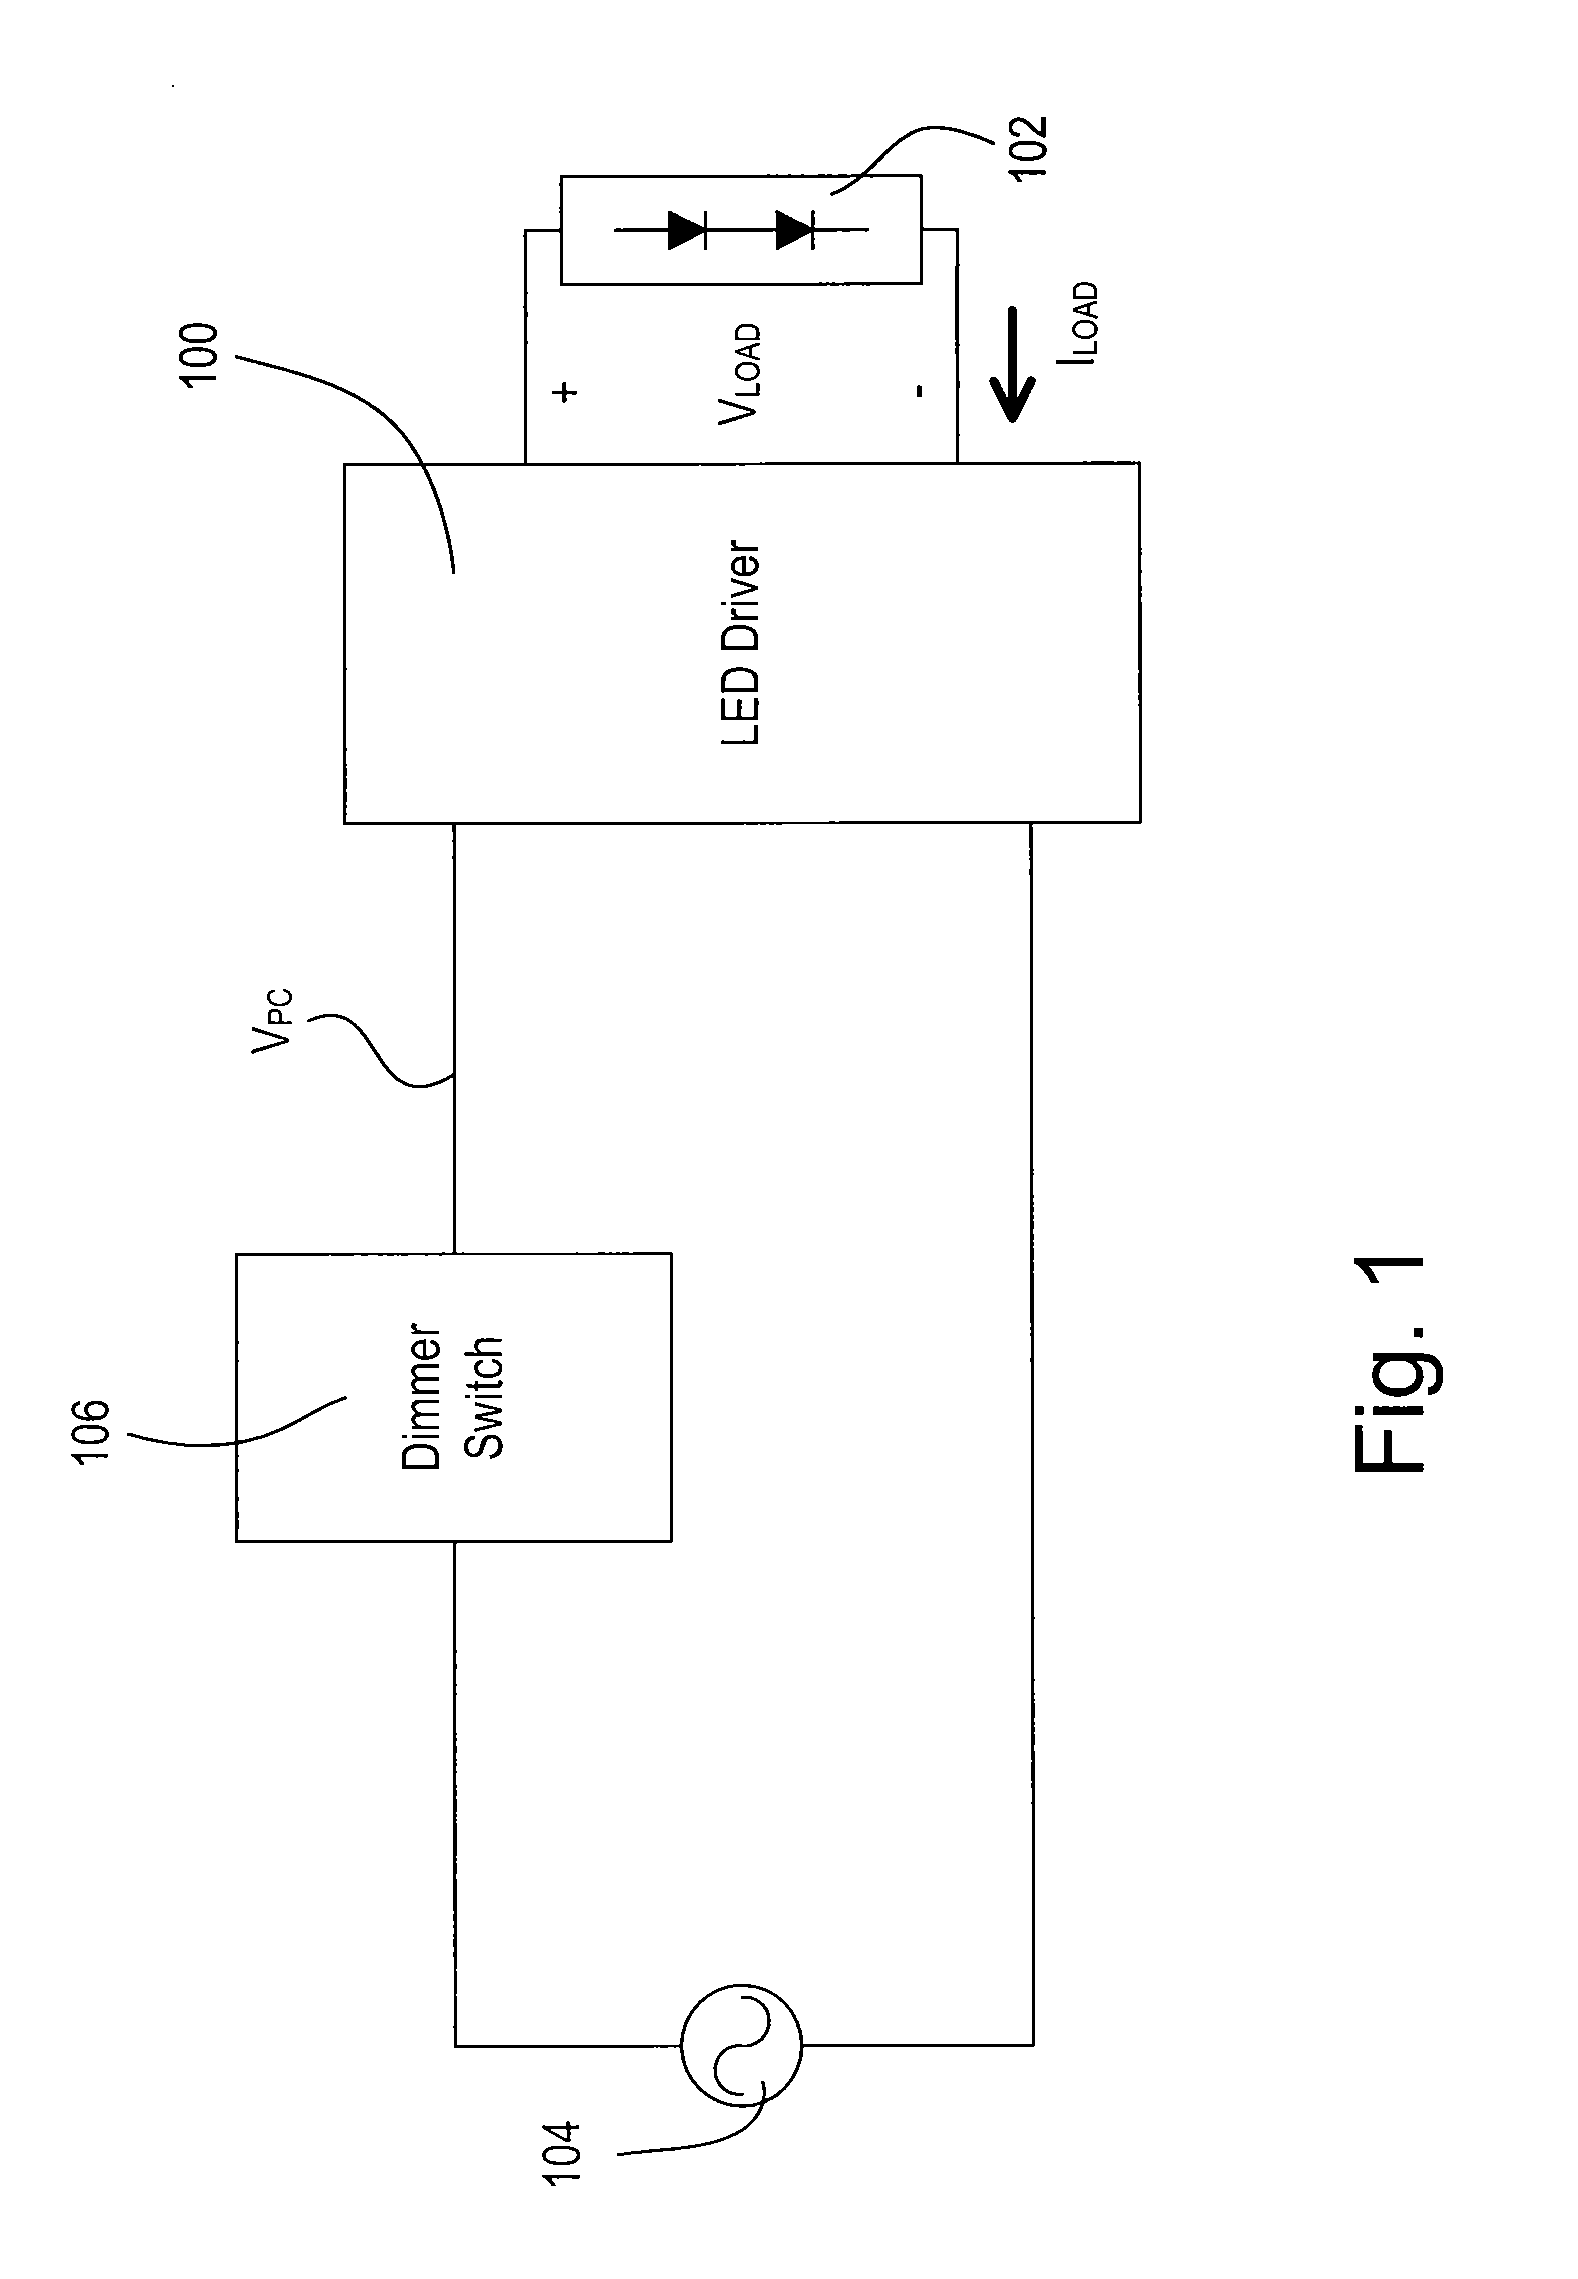 Closed-loop load control circuit having a wide output range